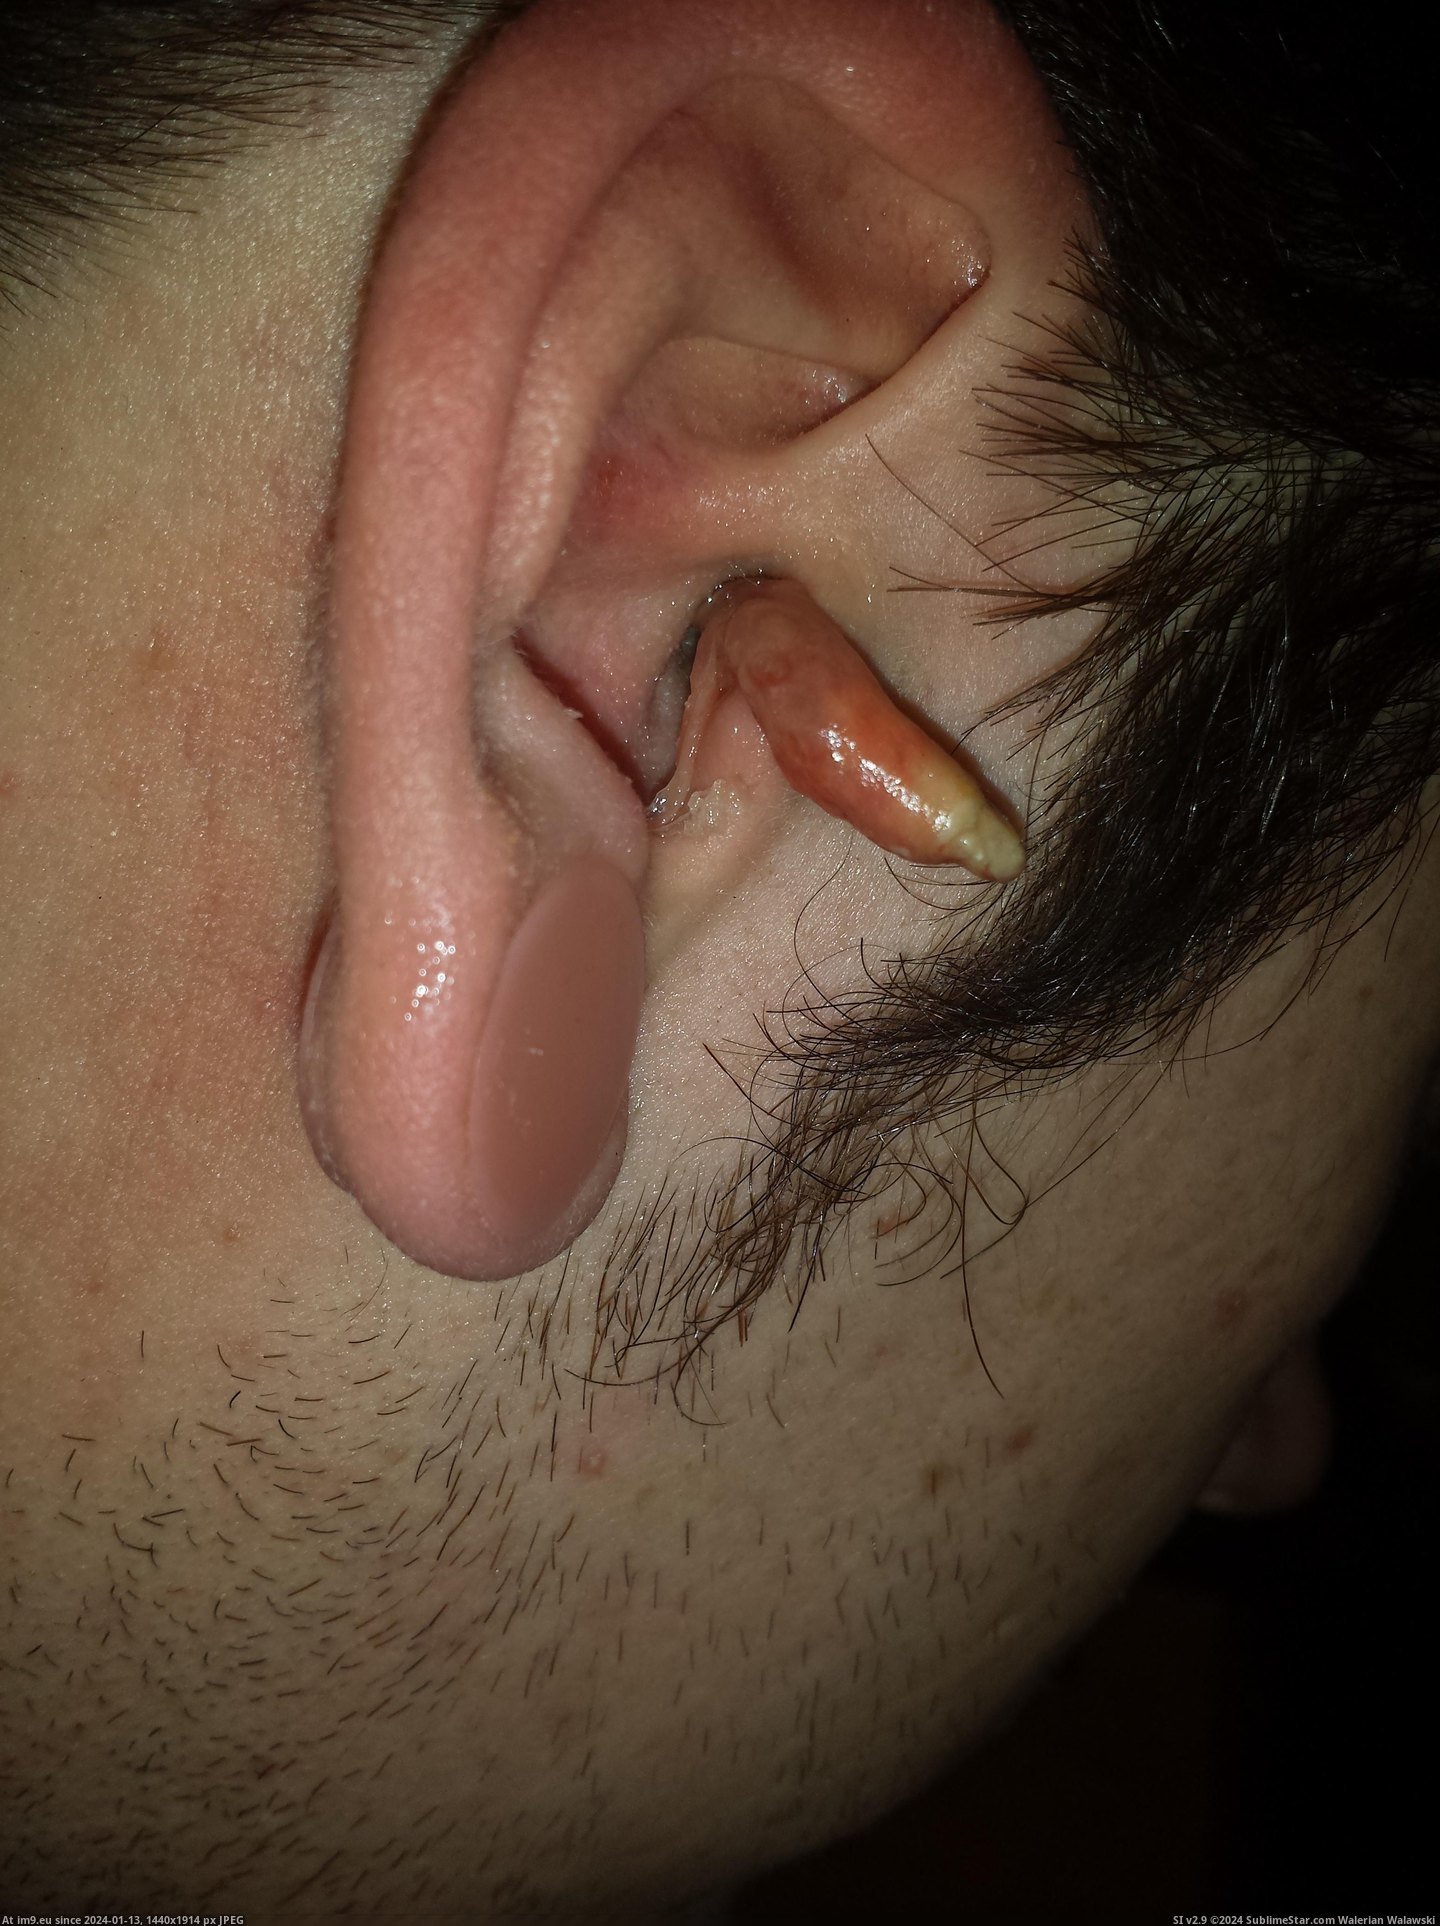 #Wtf #Ear #Infection #Crazy [Wtf] My crazy ear infection 3 Pic. (Изображение из альбом My r/WTF favs))